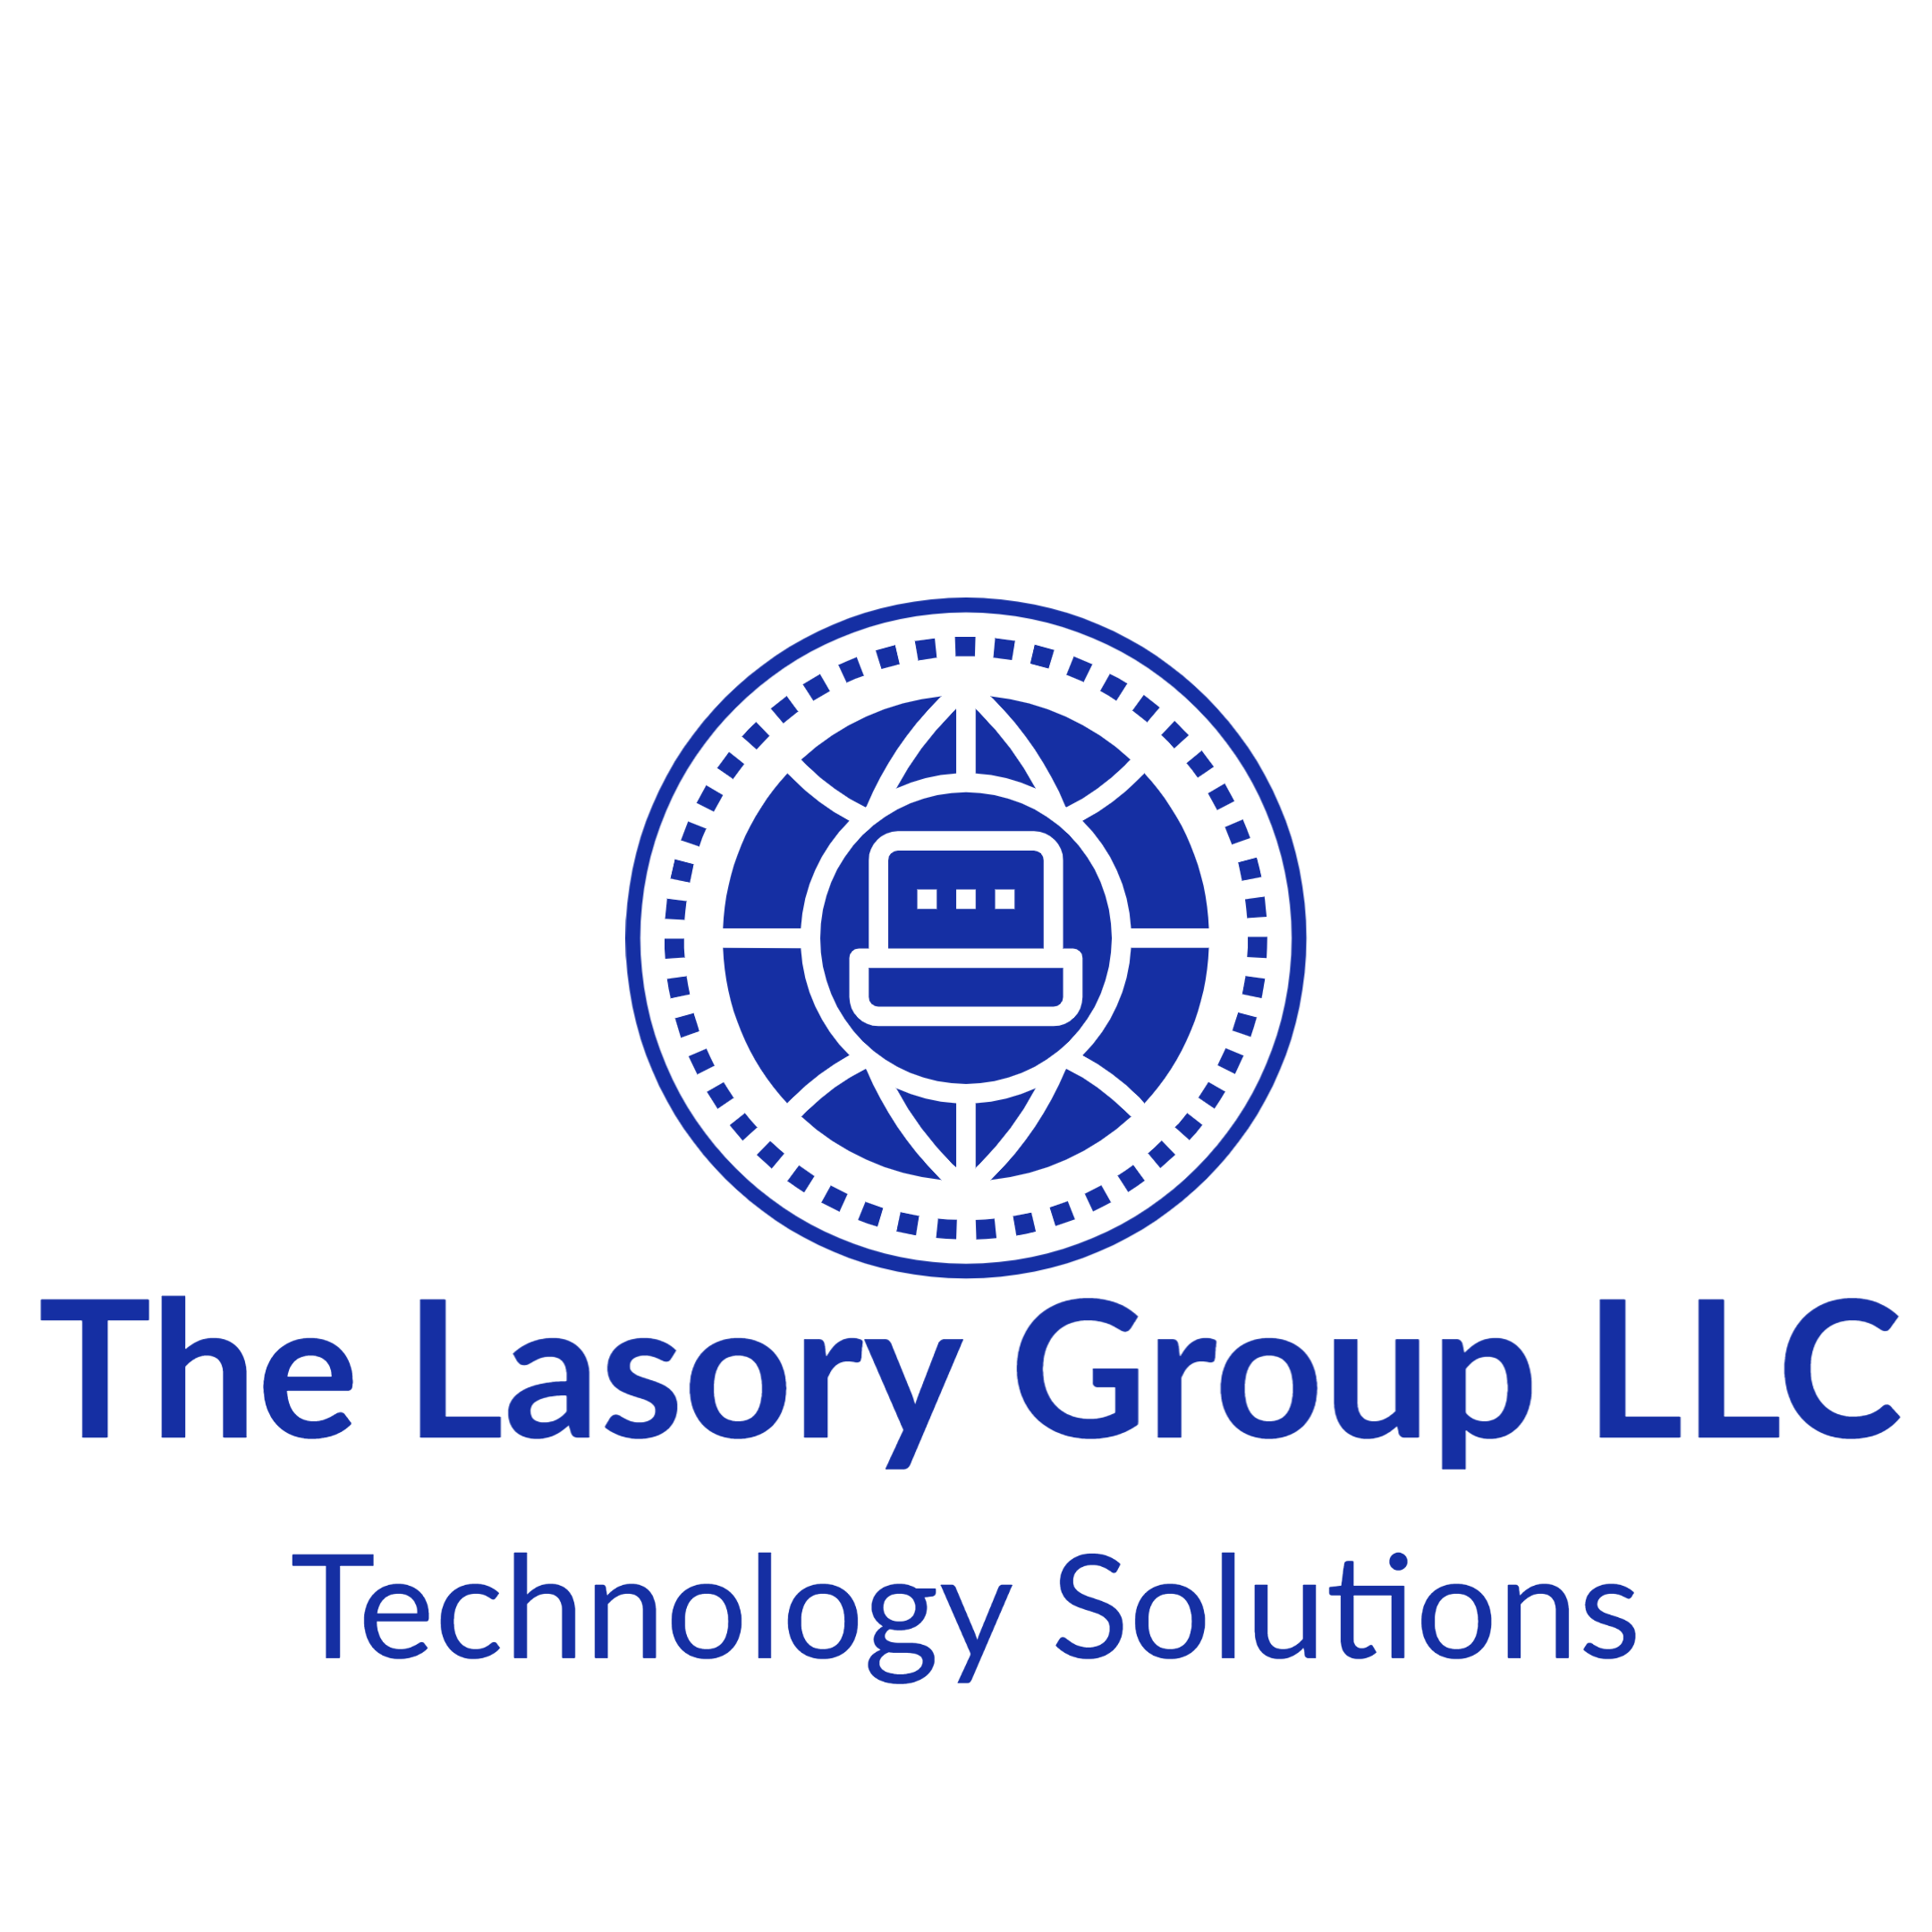 The Lasory Group